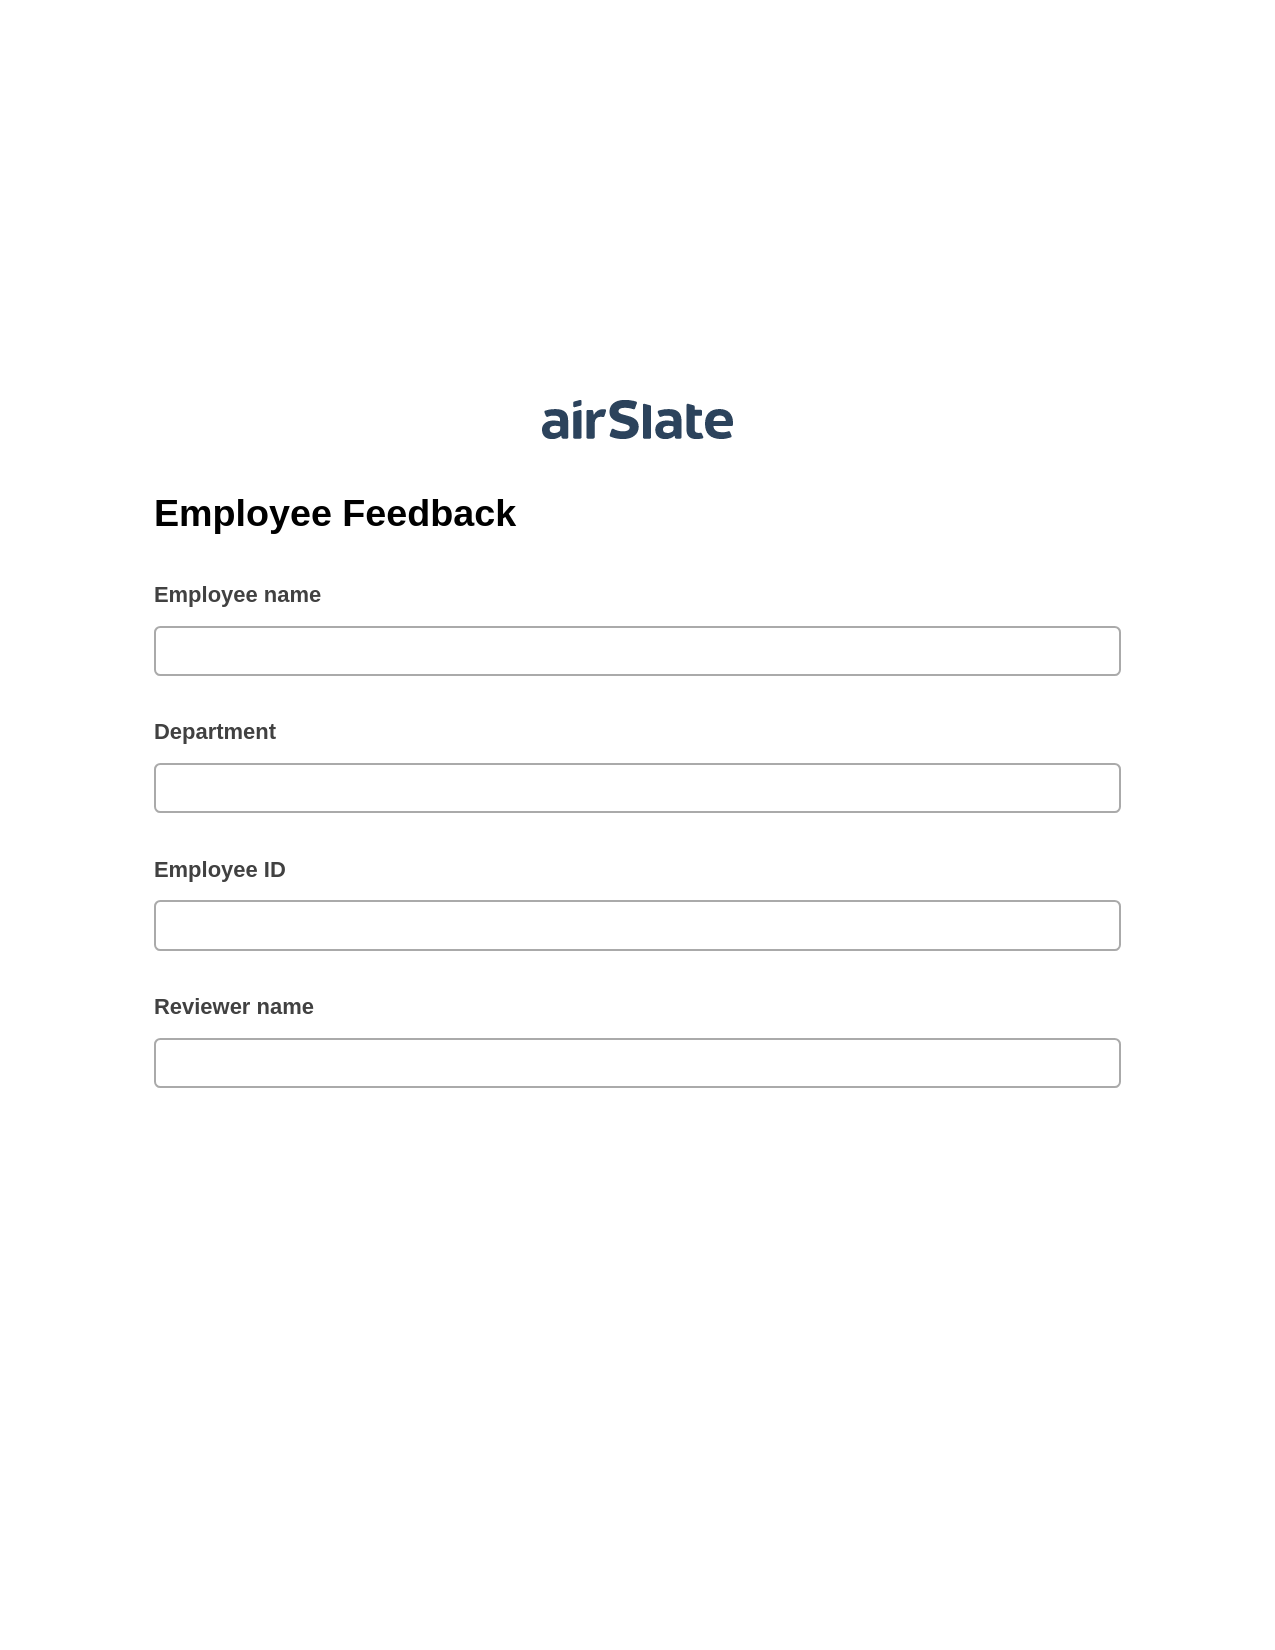 Employee Feedback Pre-fill from CSV File Dropdown Options Bot, Remove Tags From Slate Bot, Post-finish Document Bot